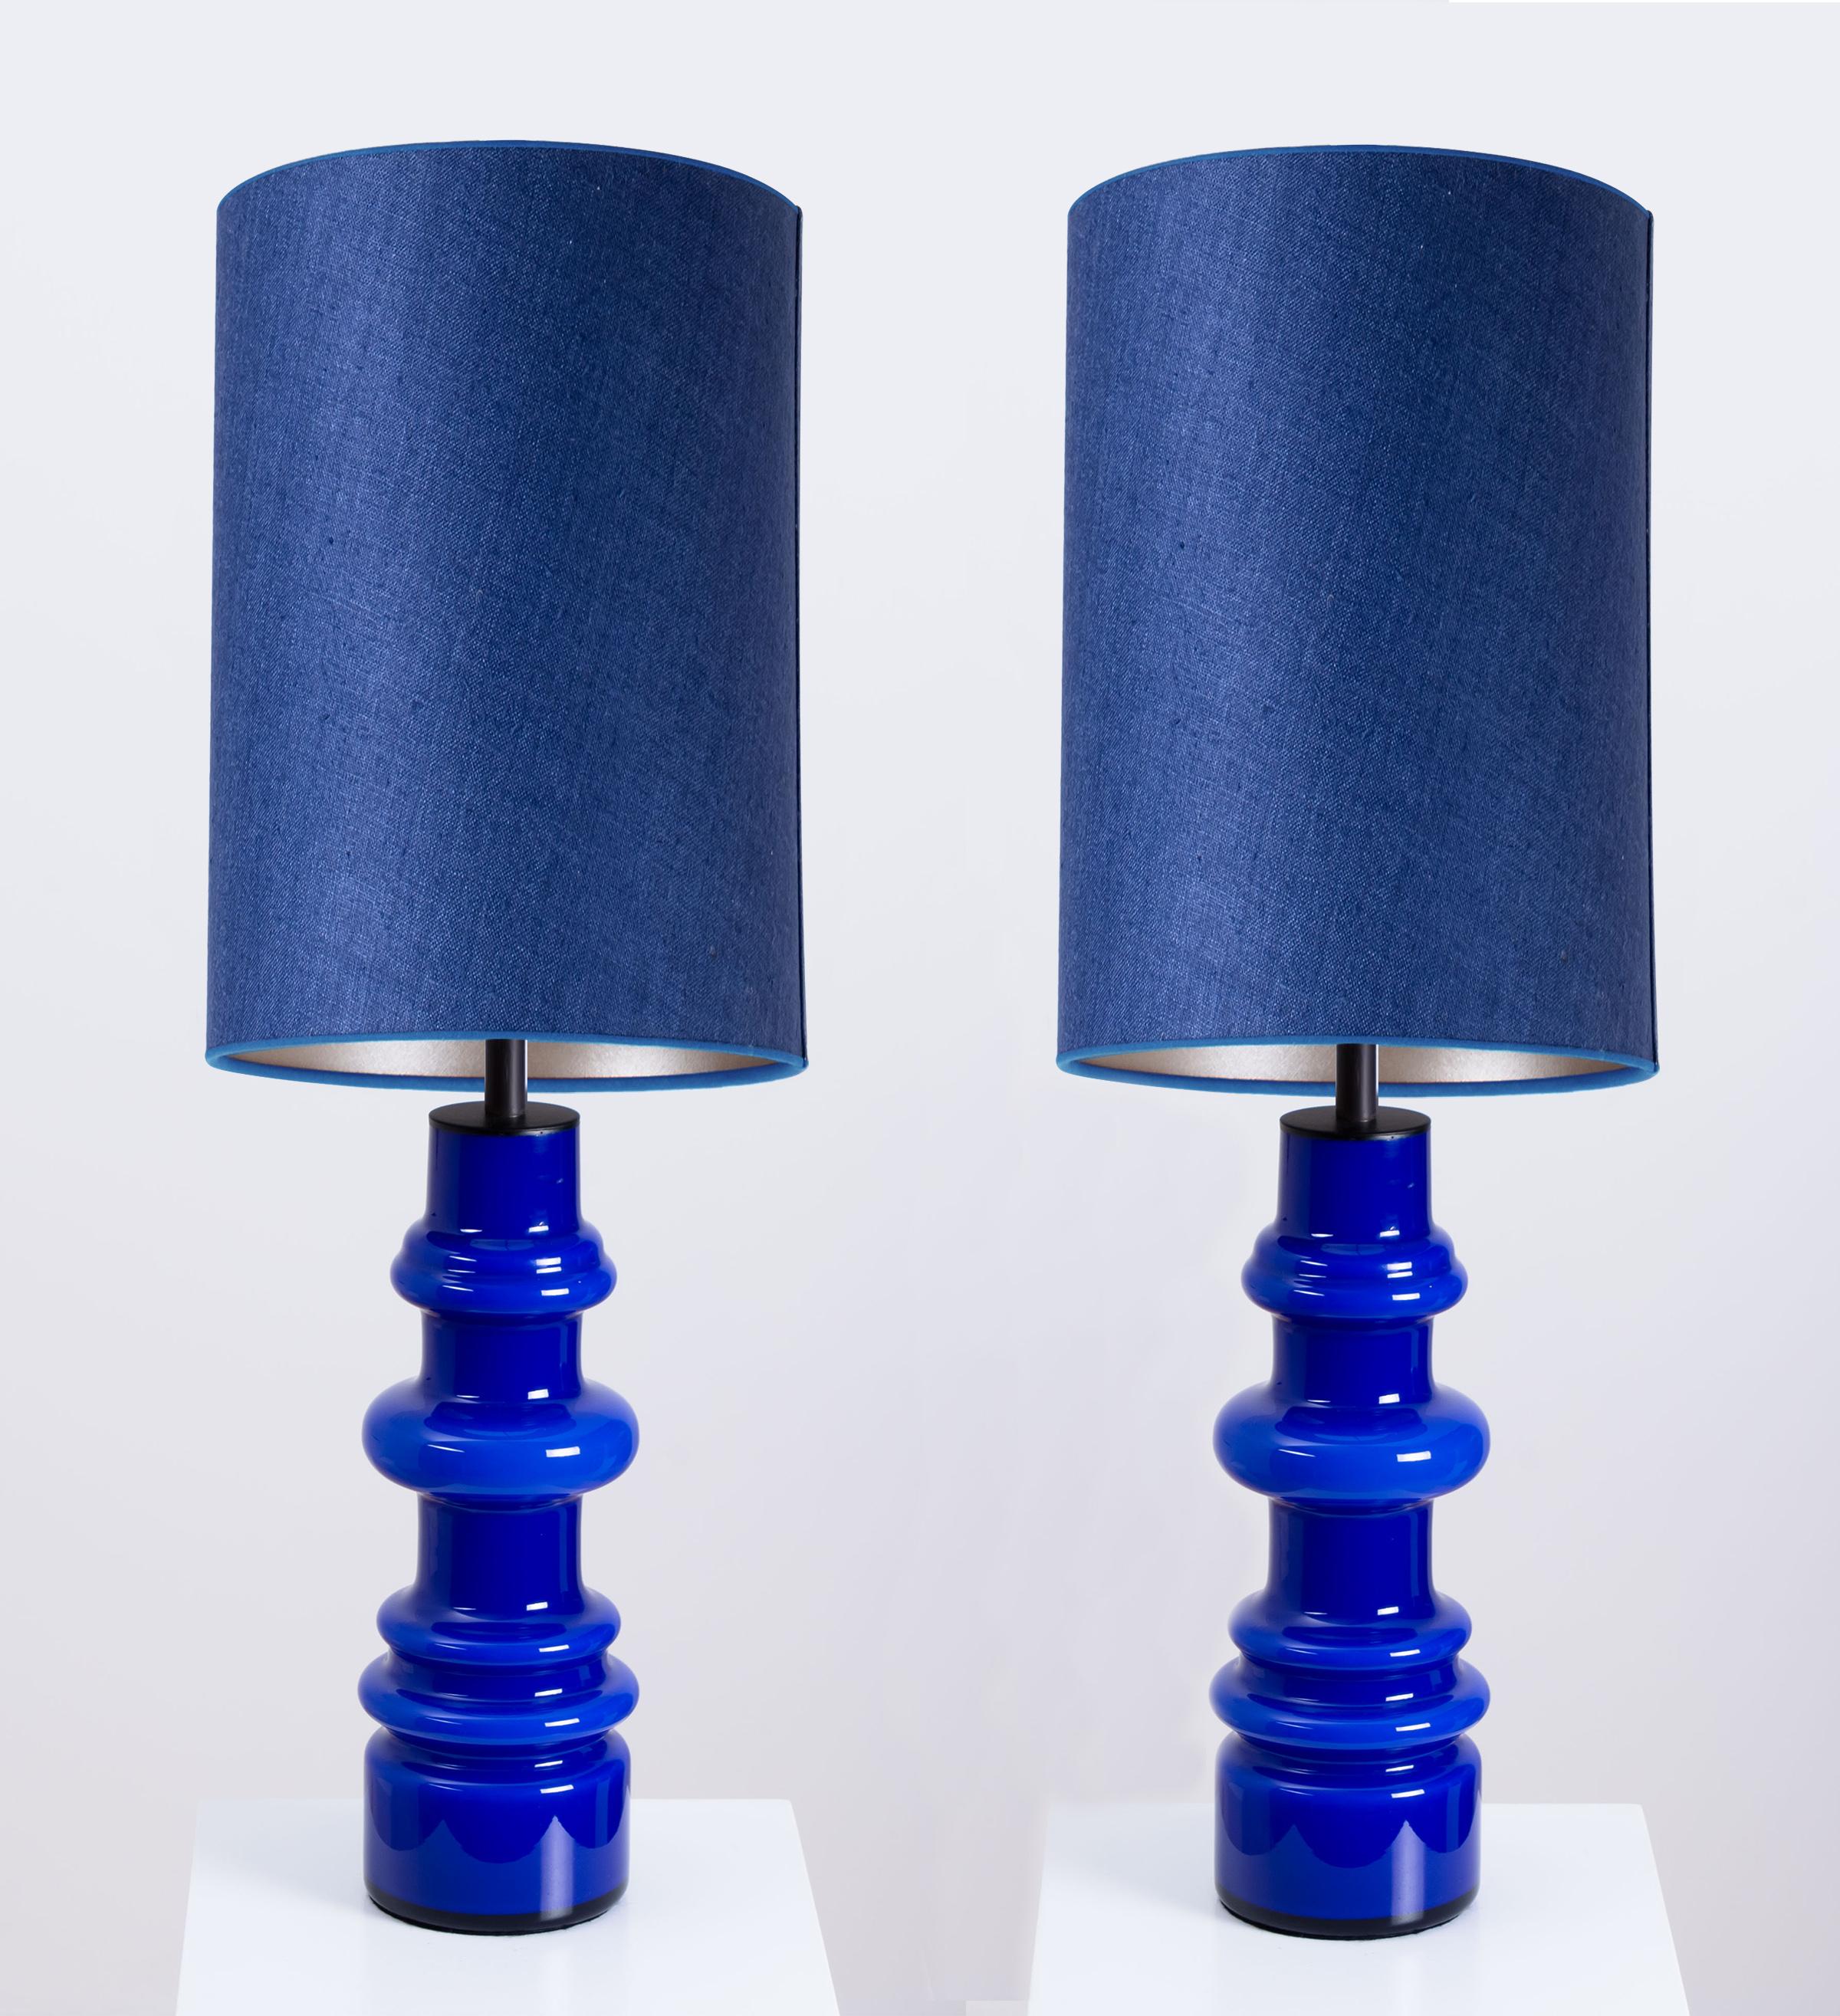 Beautiful pair of glass table lamps by Holmegaard, Denmark, 1960s. Sculptural pieces made of handmade ceramic in Persian blue tones. With new matching custom made blue silk lamp shades with warm gold/silver inner- shade by René Houben.

The pair